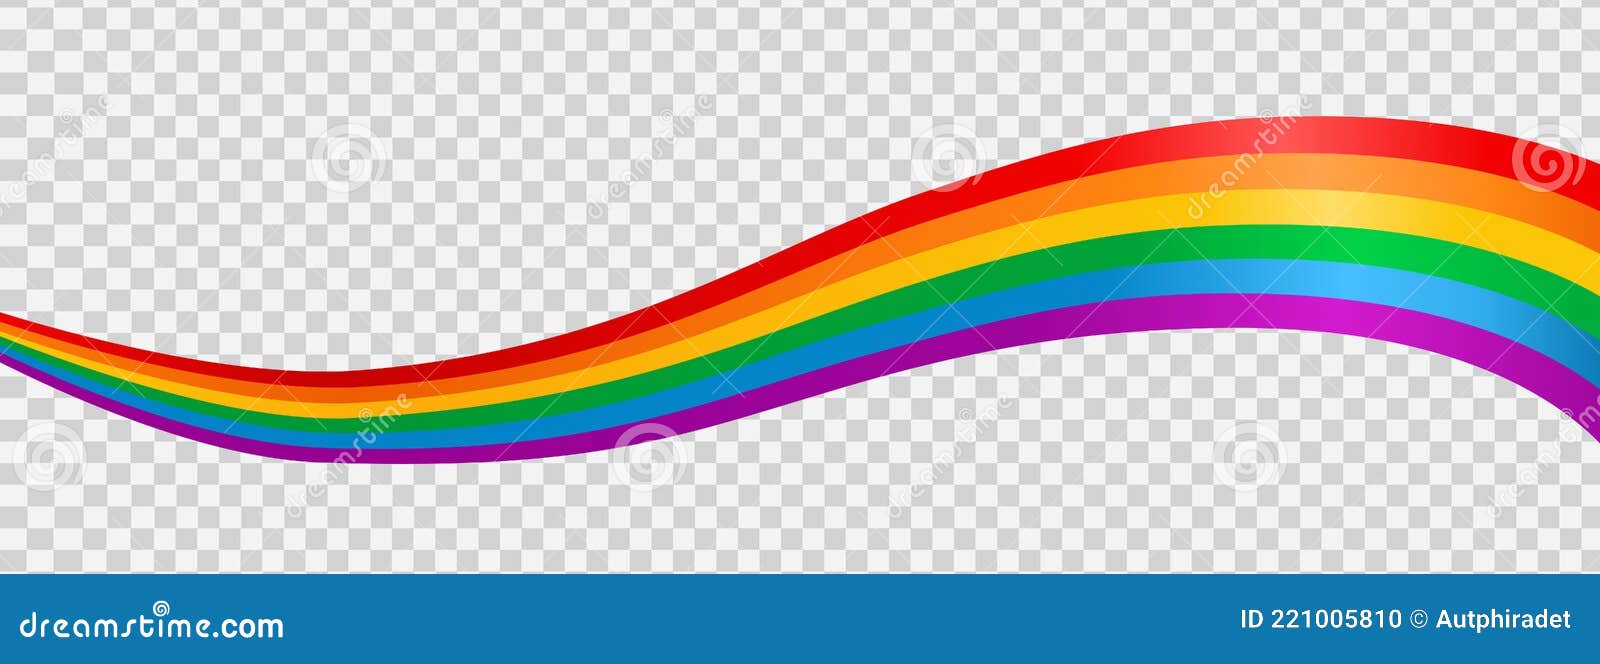 Waving Rainbow Lgbt Flag Isolated On Png Or Transparent Background, Symbol  Of Lgbt Gay Pride,Vector Illustration Stock Vector - Illustration Of  Beautiful, Design: 221005810